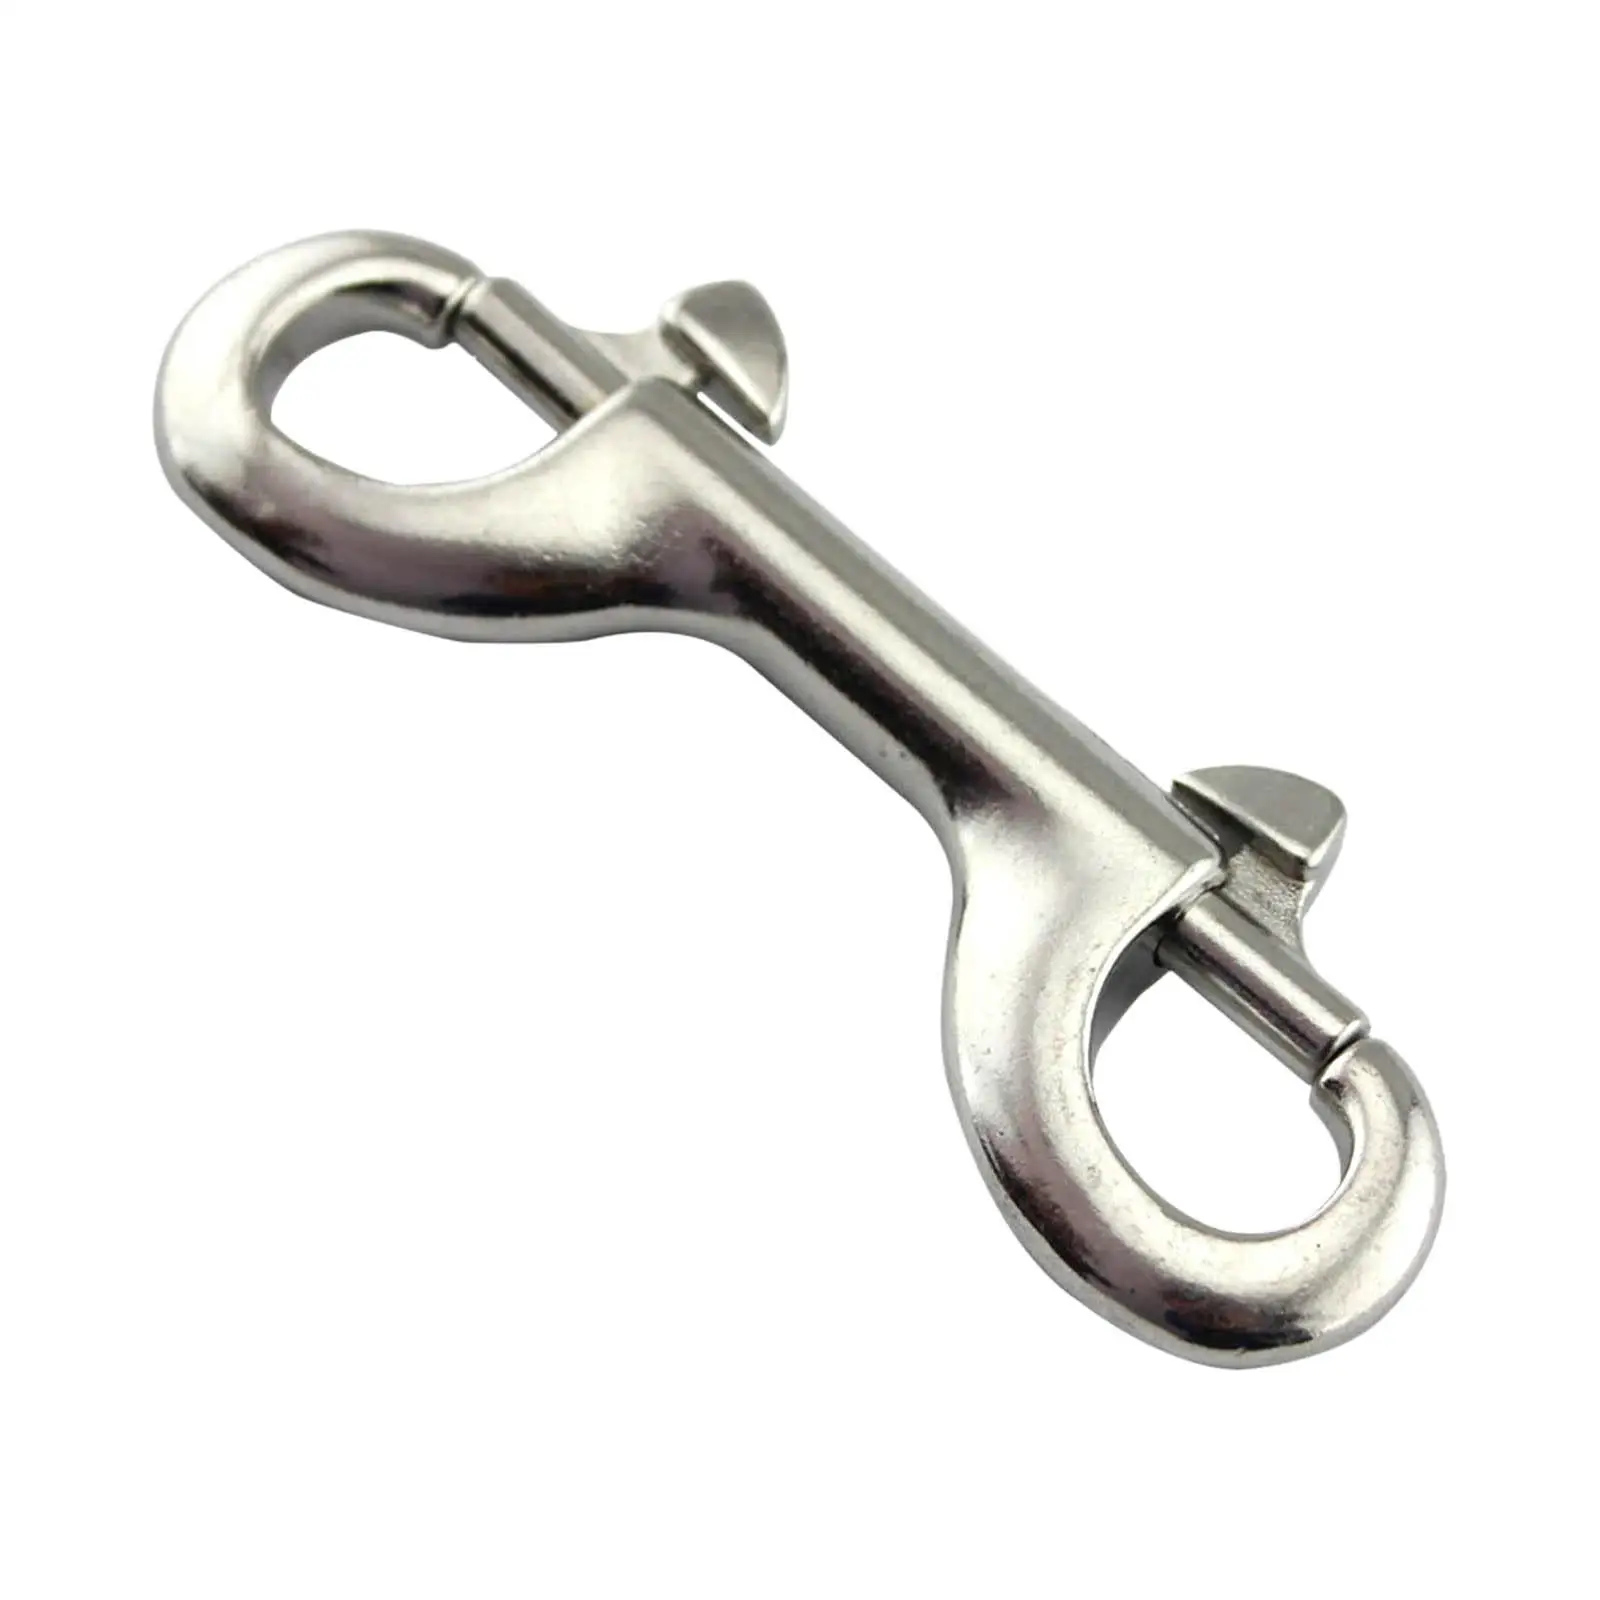 Double Ended Hook Diving Snap Bolt Clip Marine Grade for Key Chain